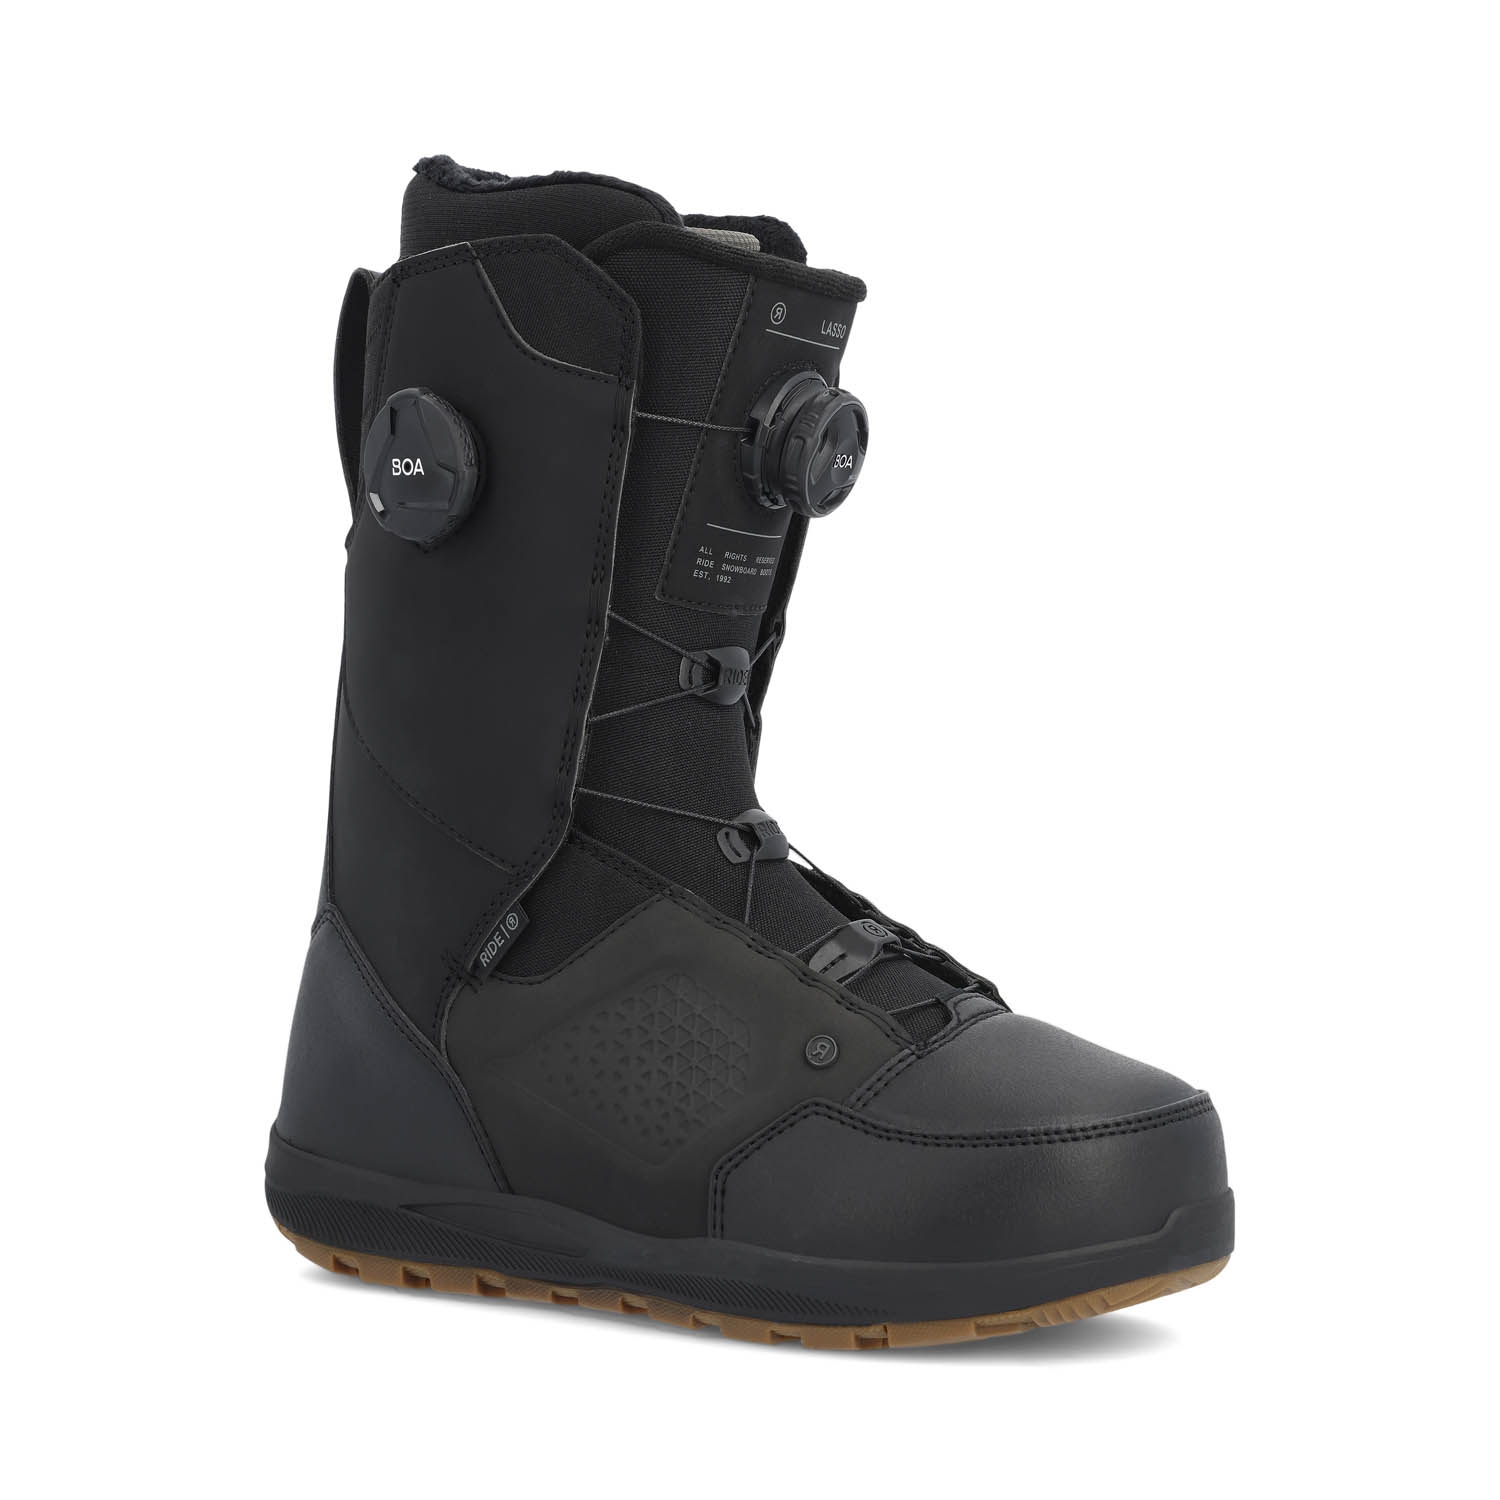 Clearance Snowboard Boots Boots